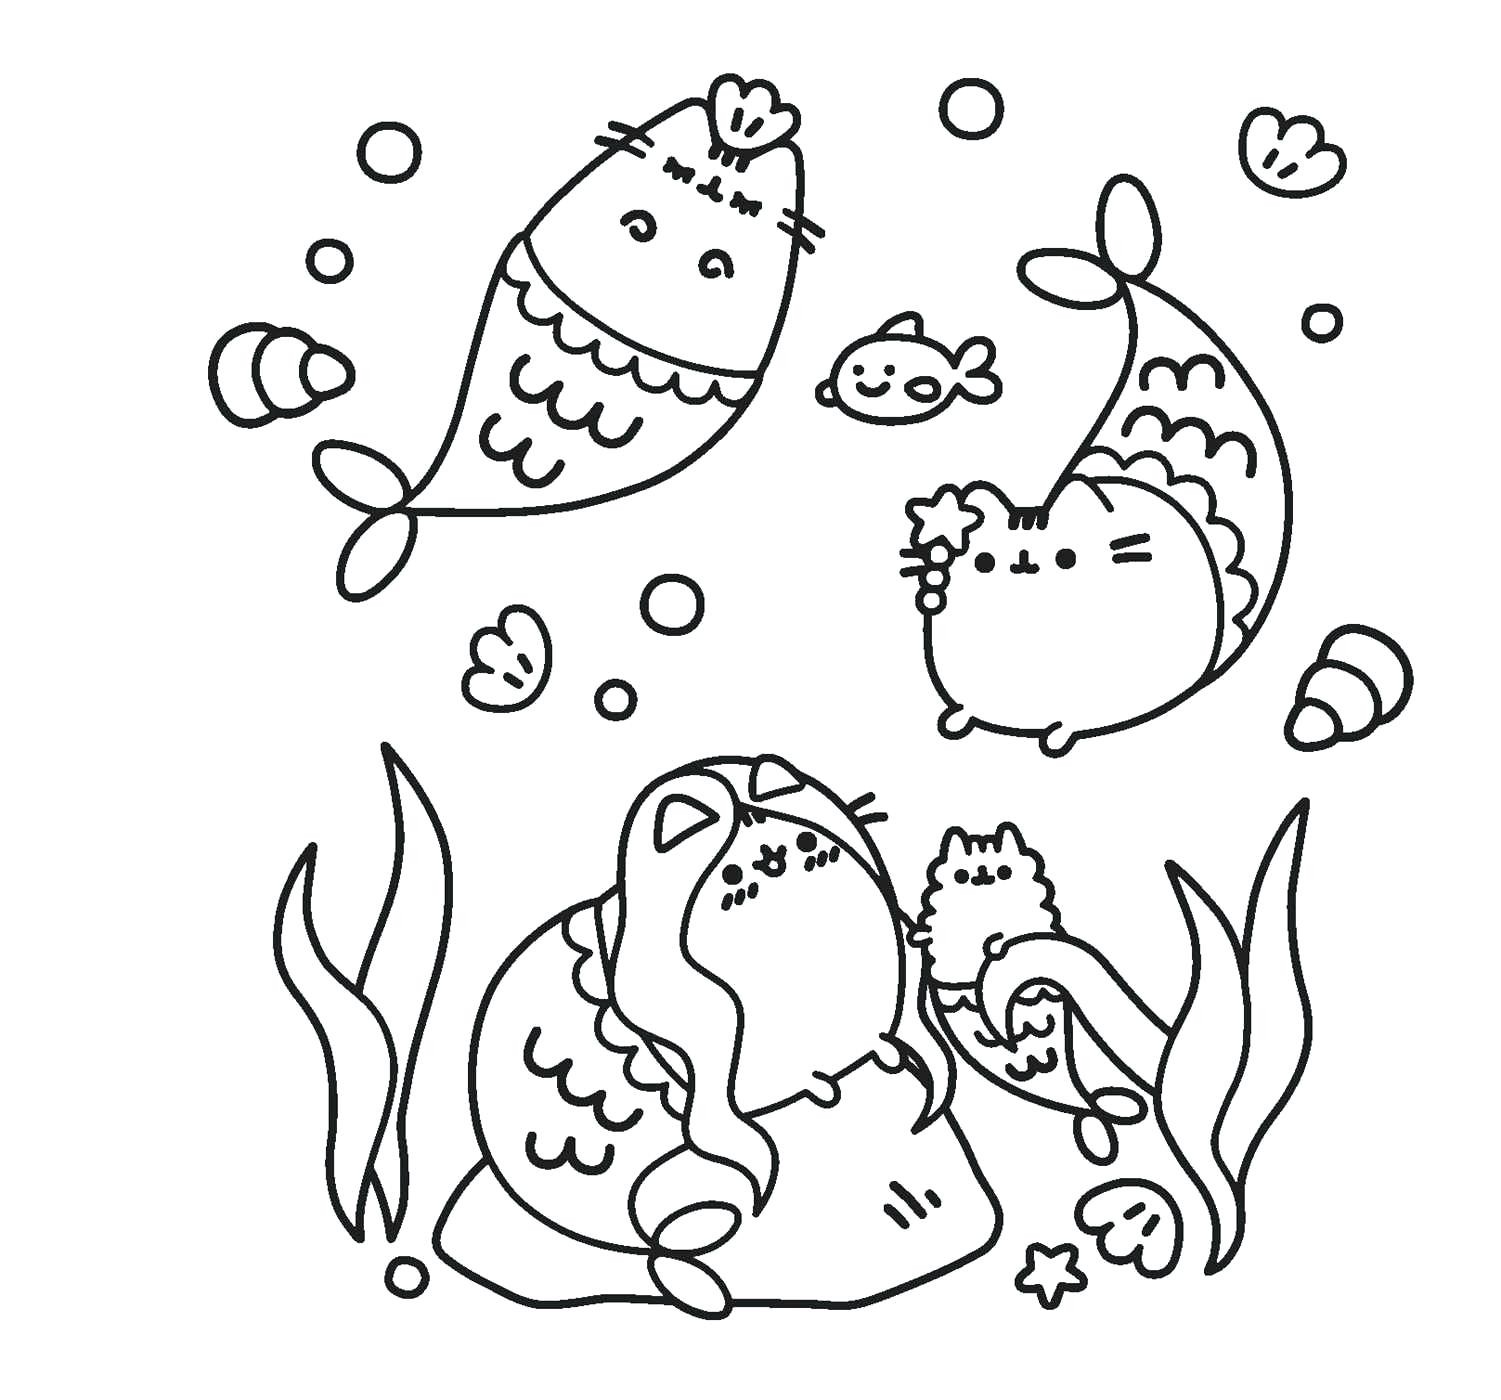 Rhyming Coloring Pages at GetColorings.com | Free printable colorings